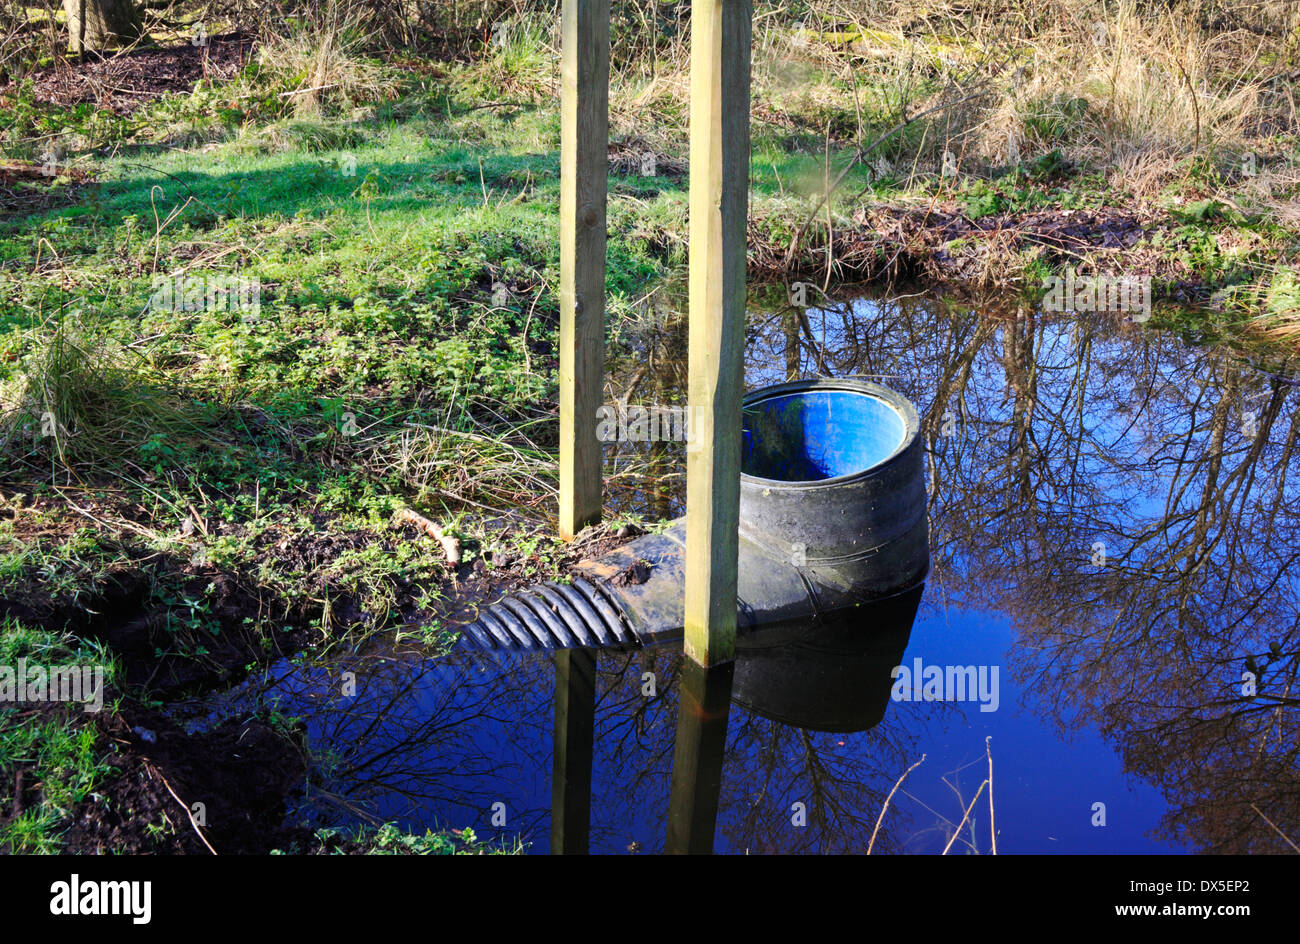 A simple water level outflow pipe at Alderfen Broad Nature Reserve, Norfolk, England, United Kingdom. Stock Photo